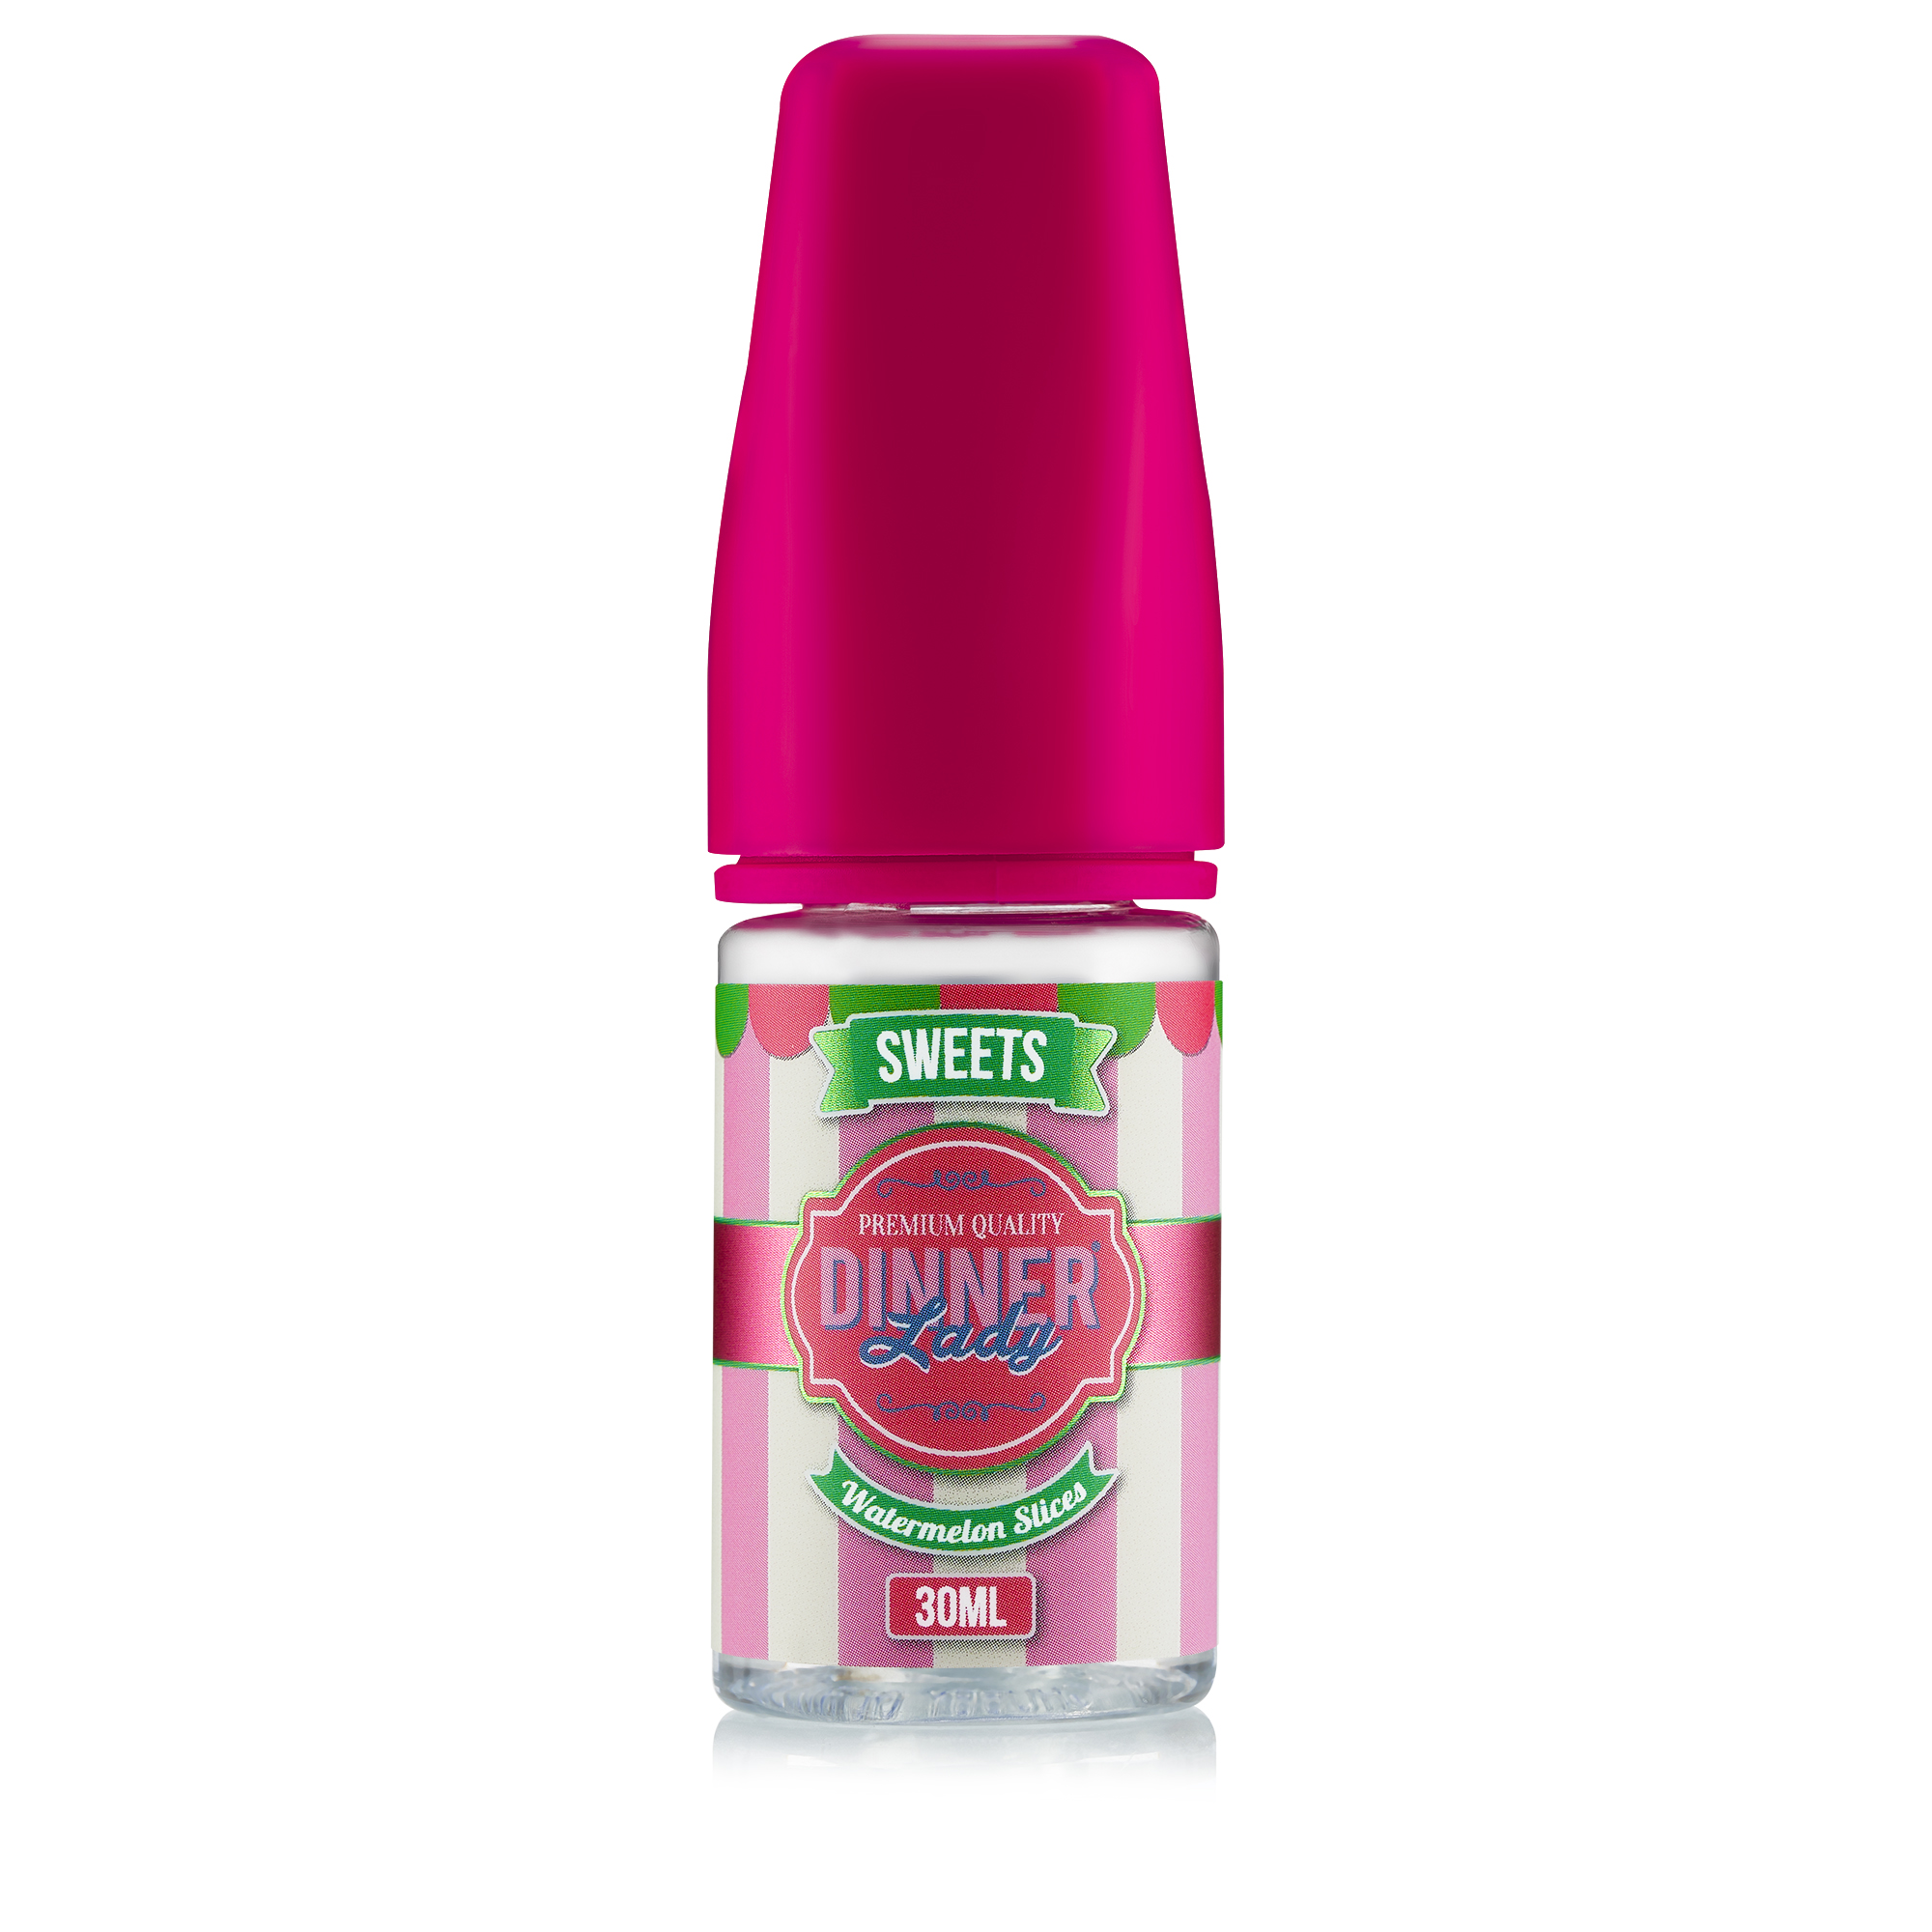 Watermelon Slices Flavour Concentrate by Dinner Lady